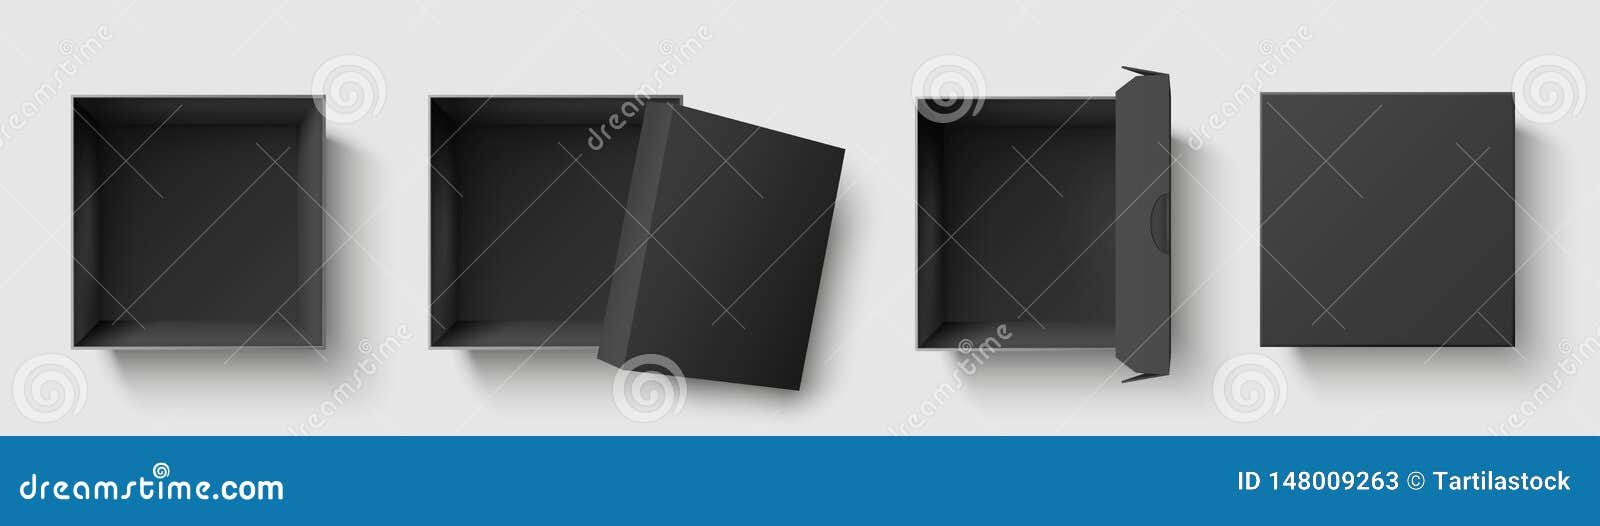 Download Black Top View Box. Dark Package Square Boxes With Open Cap, Empty Cube Packages Mockup 3d ...